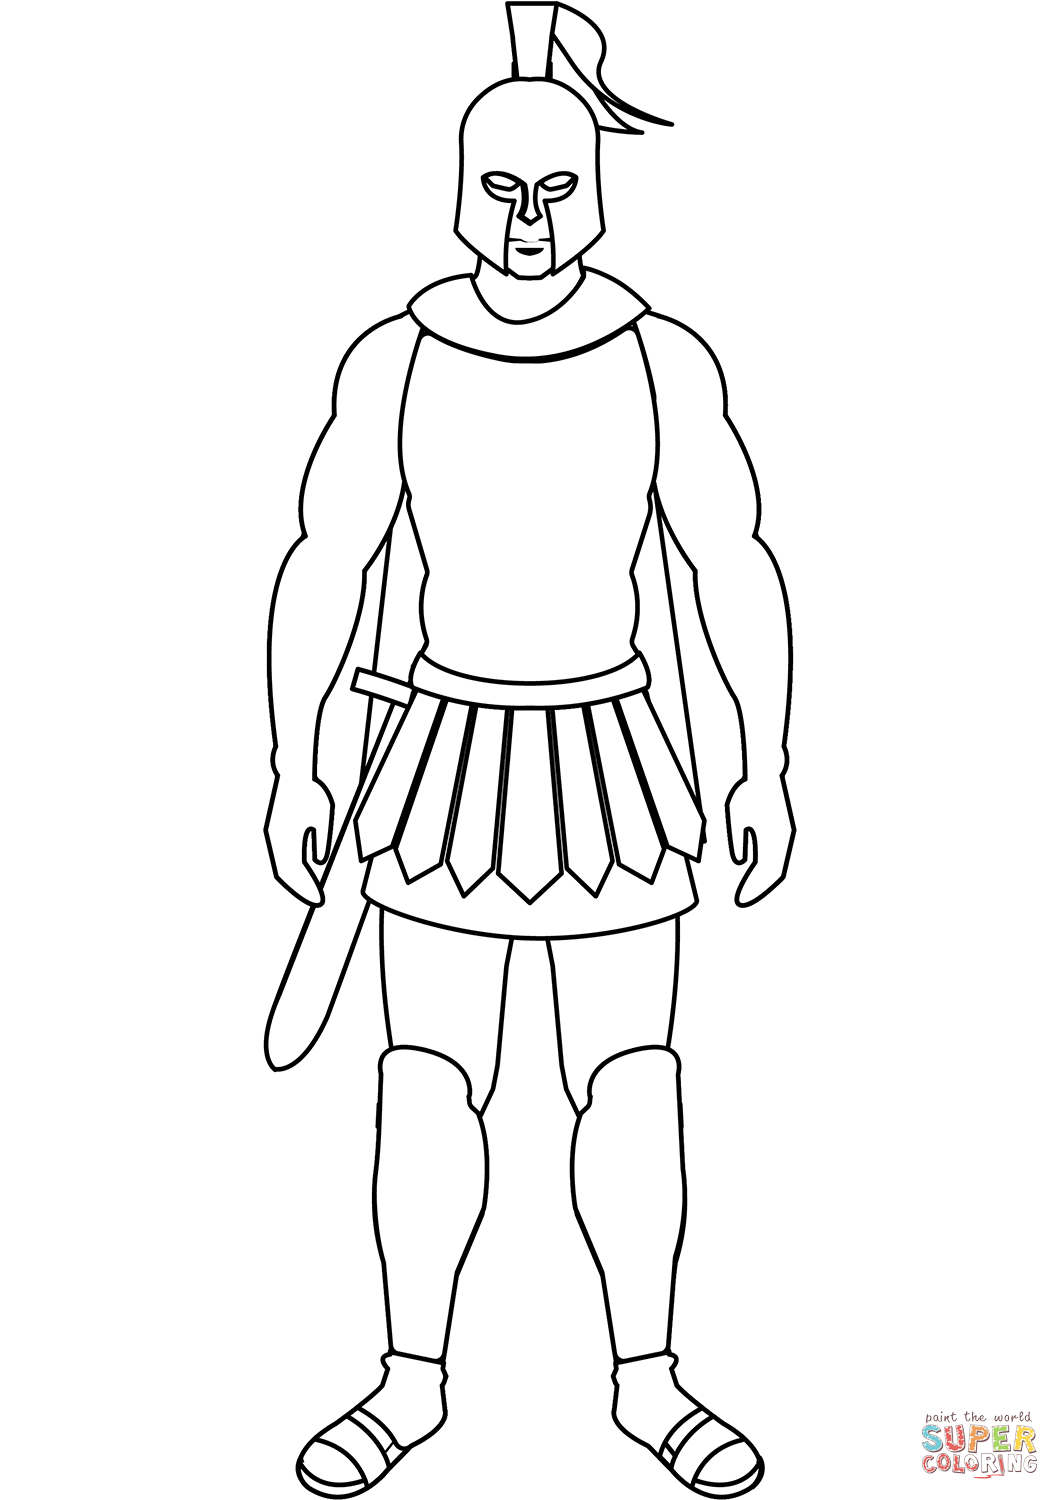 Spartan warrior coloring page free printable coloring pages